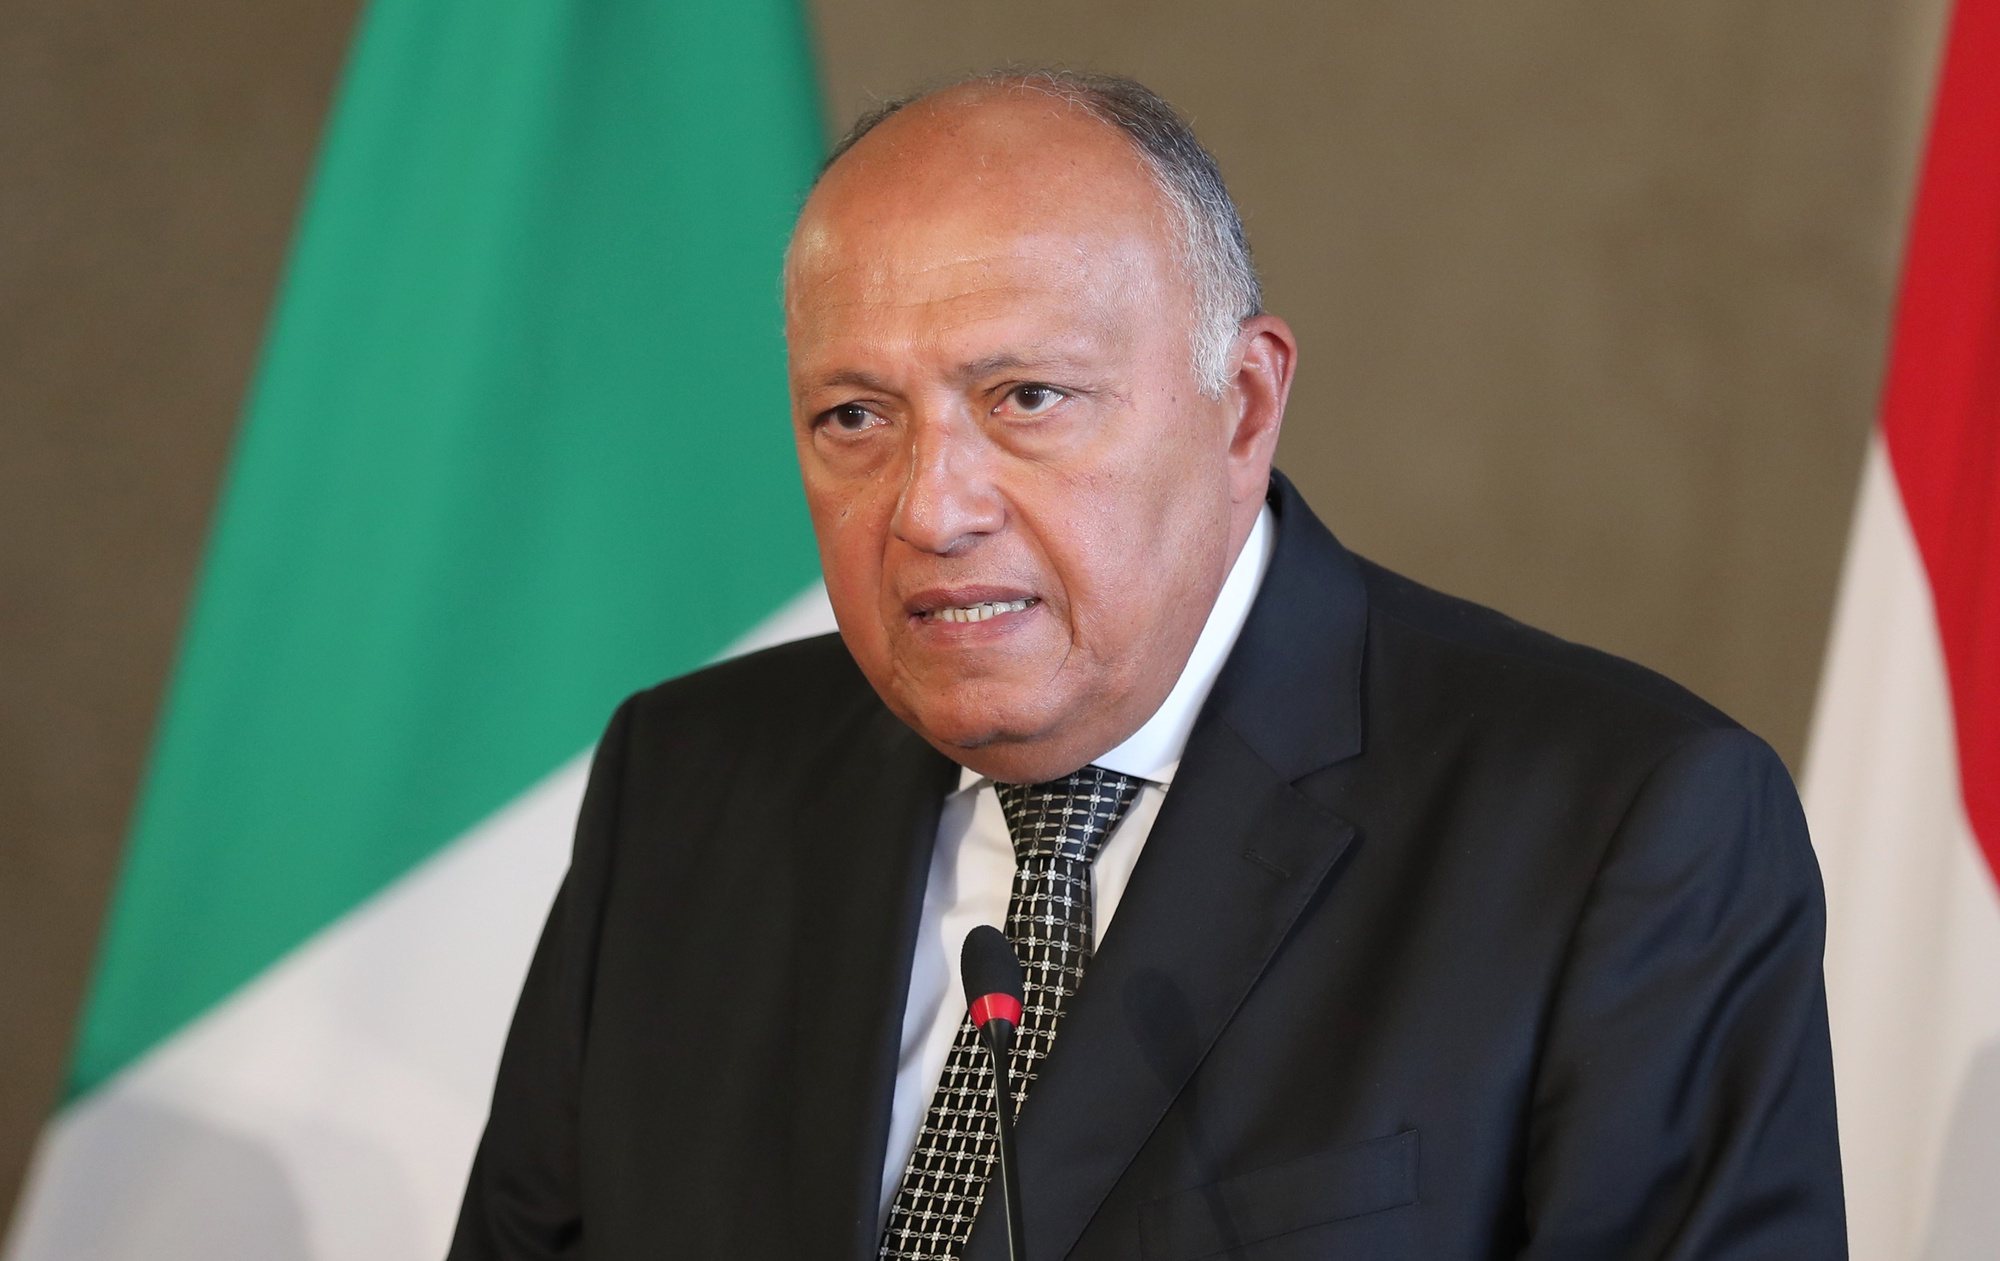 epa10422434 Egyptian Foreign Minister Sameh Shoukry speaks during a joint press conference with his Italian counterpart Antonio Tajani following their meeting in Cairo, Egypt 22 January 2023.  EPA/KHALED ELFIQI